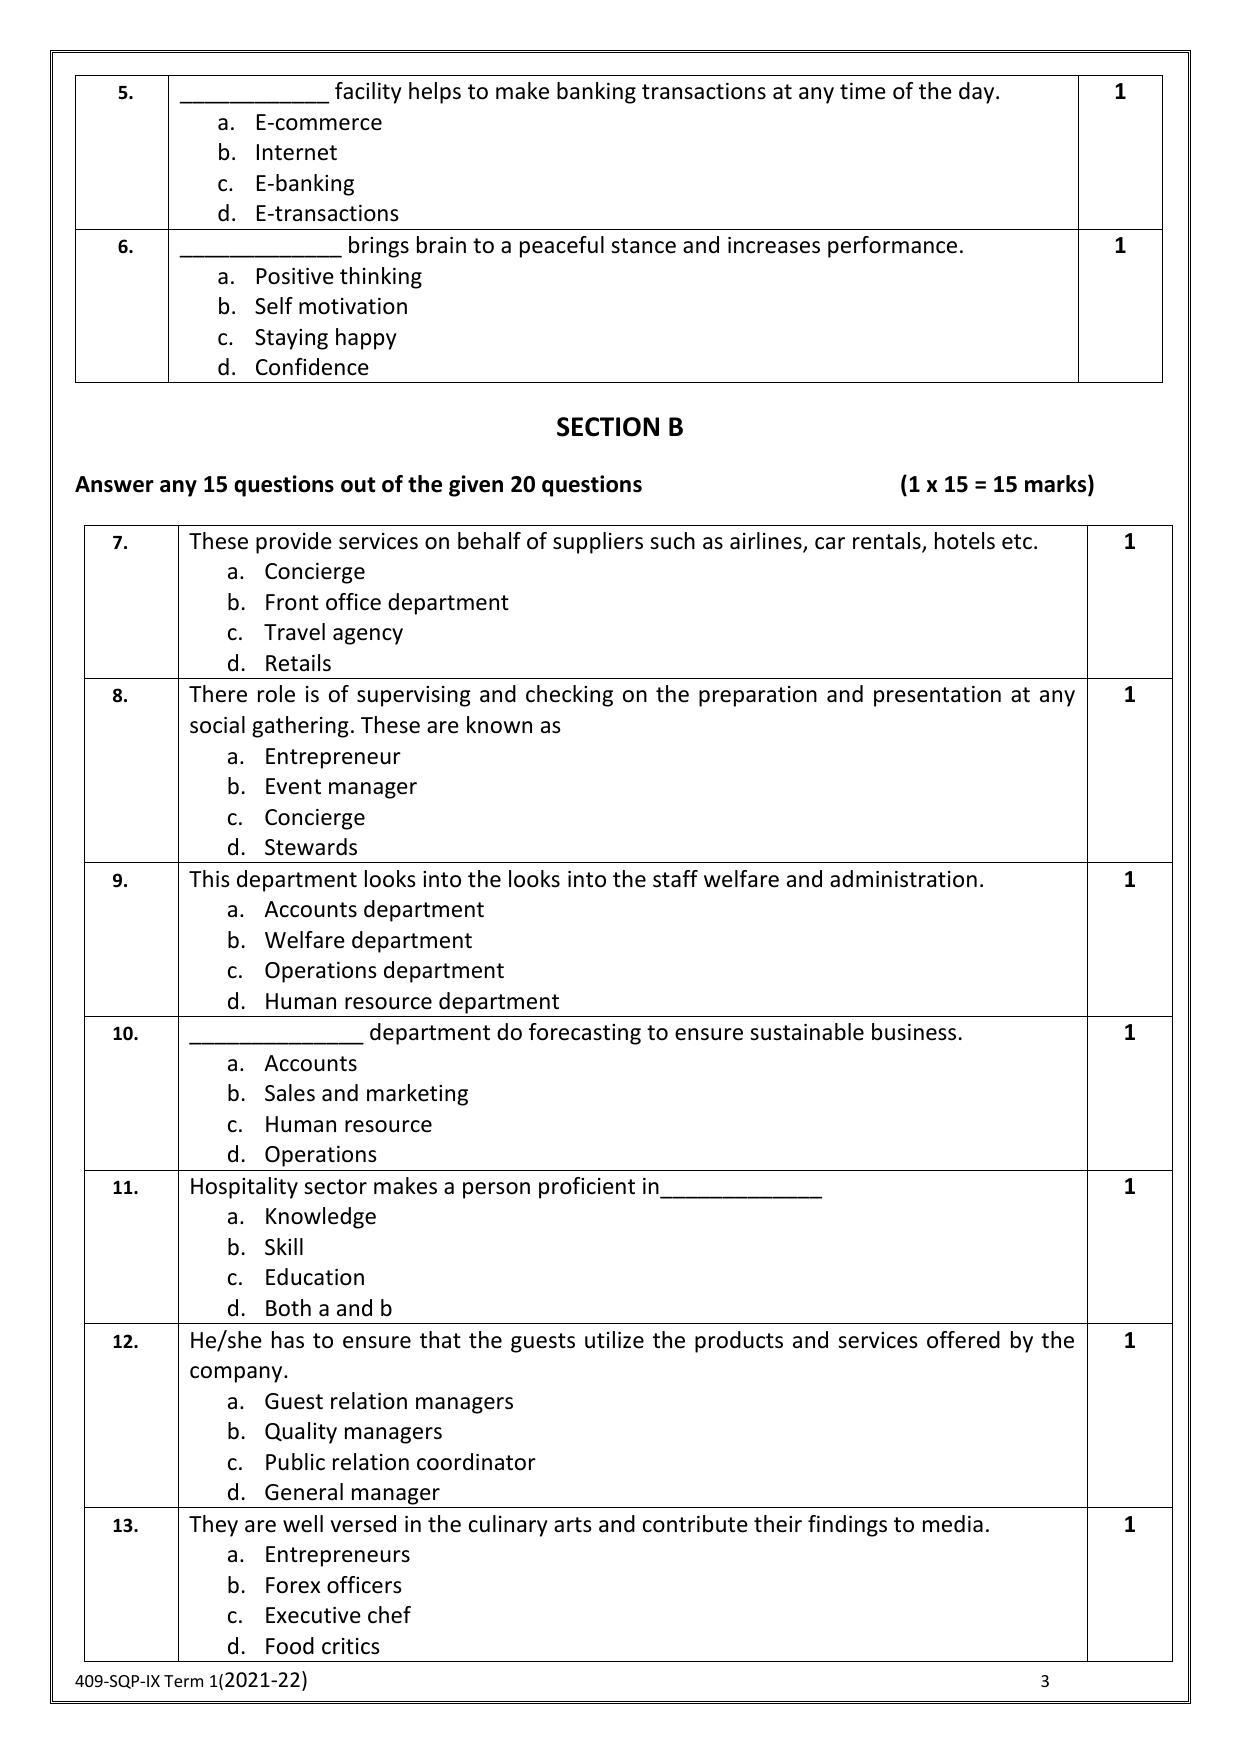 CBSE Class 10 Skill Education (Term I) - Food Production Sample Paper 2021-22 - Page 3